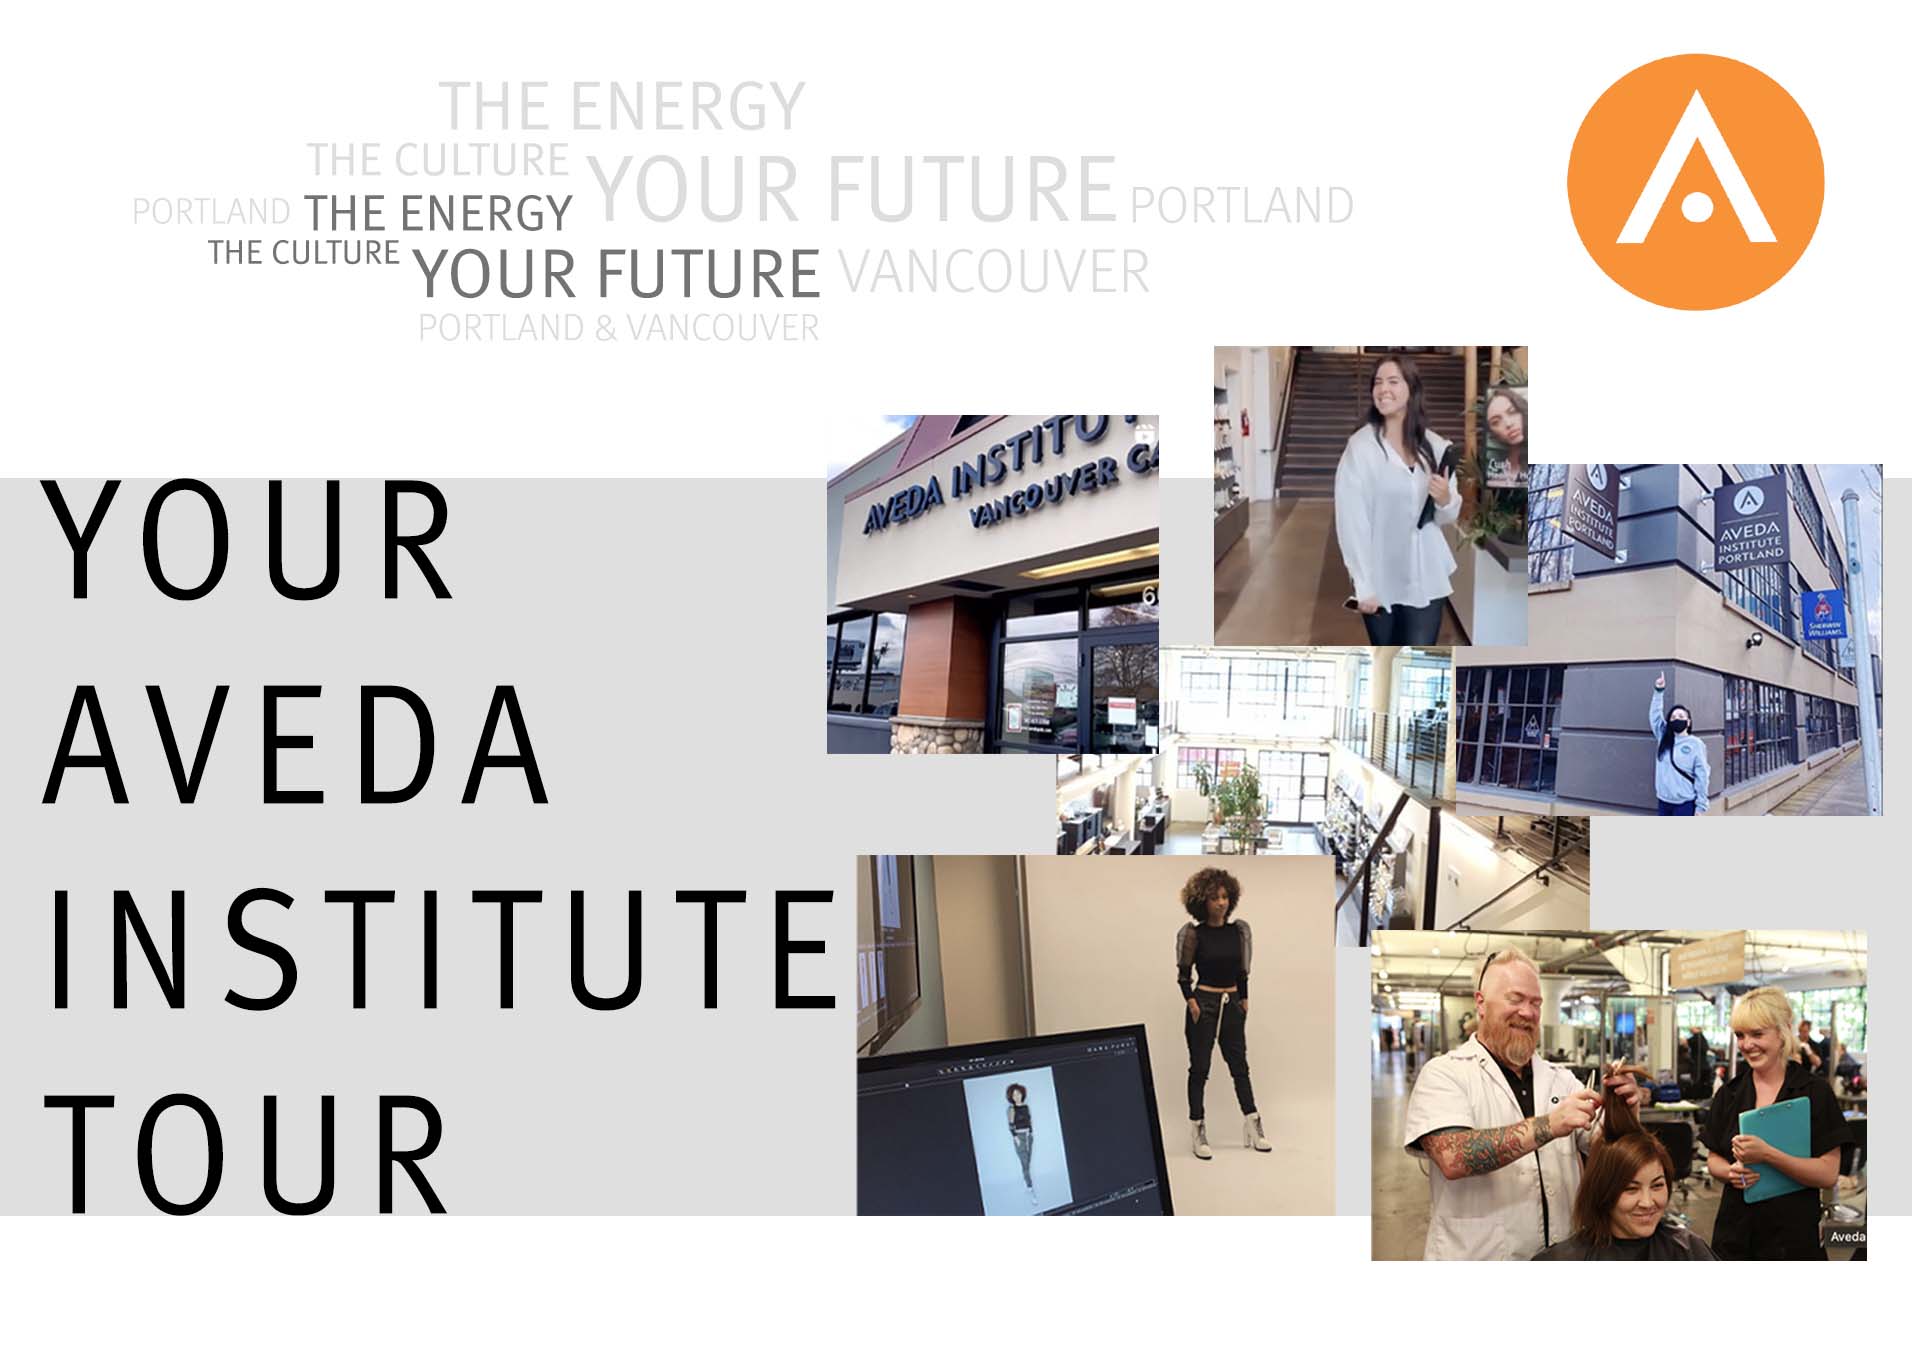 Six Ways To Maximize Your Aveda Institute Tour with images of the AIP Portland and Vancouver